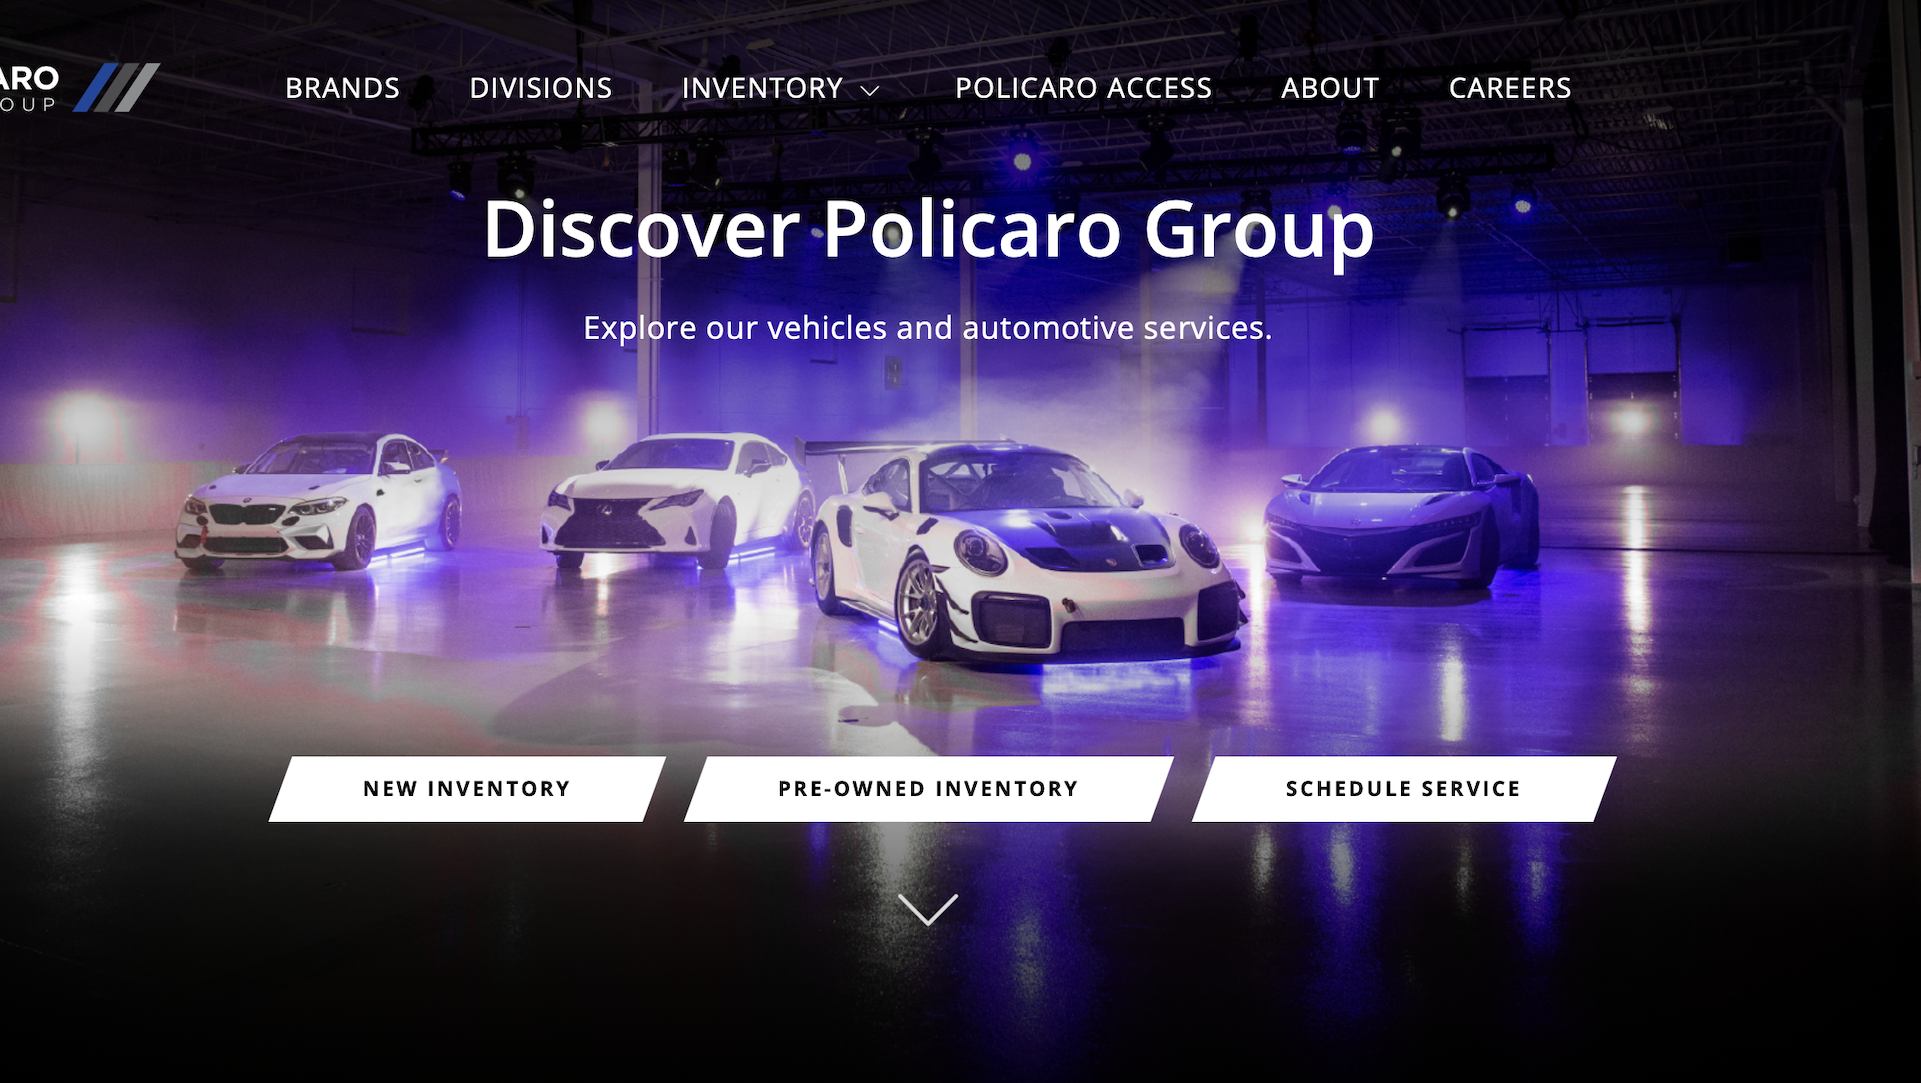 Four luxury sports cars on a stage with purple lighting. Text: Discover Policaro Group with arrows to new and pre-owned inventory.